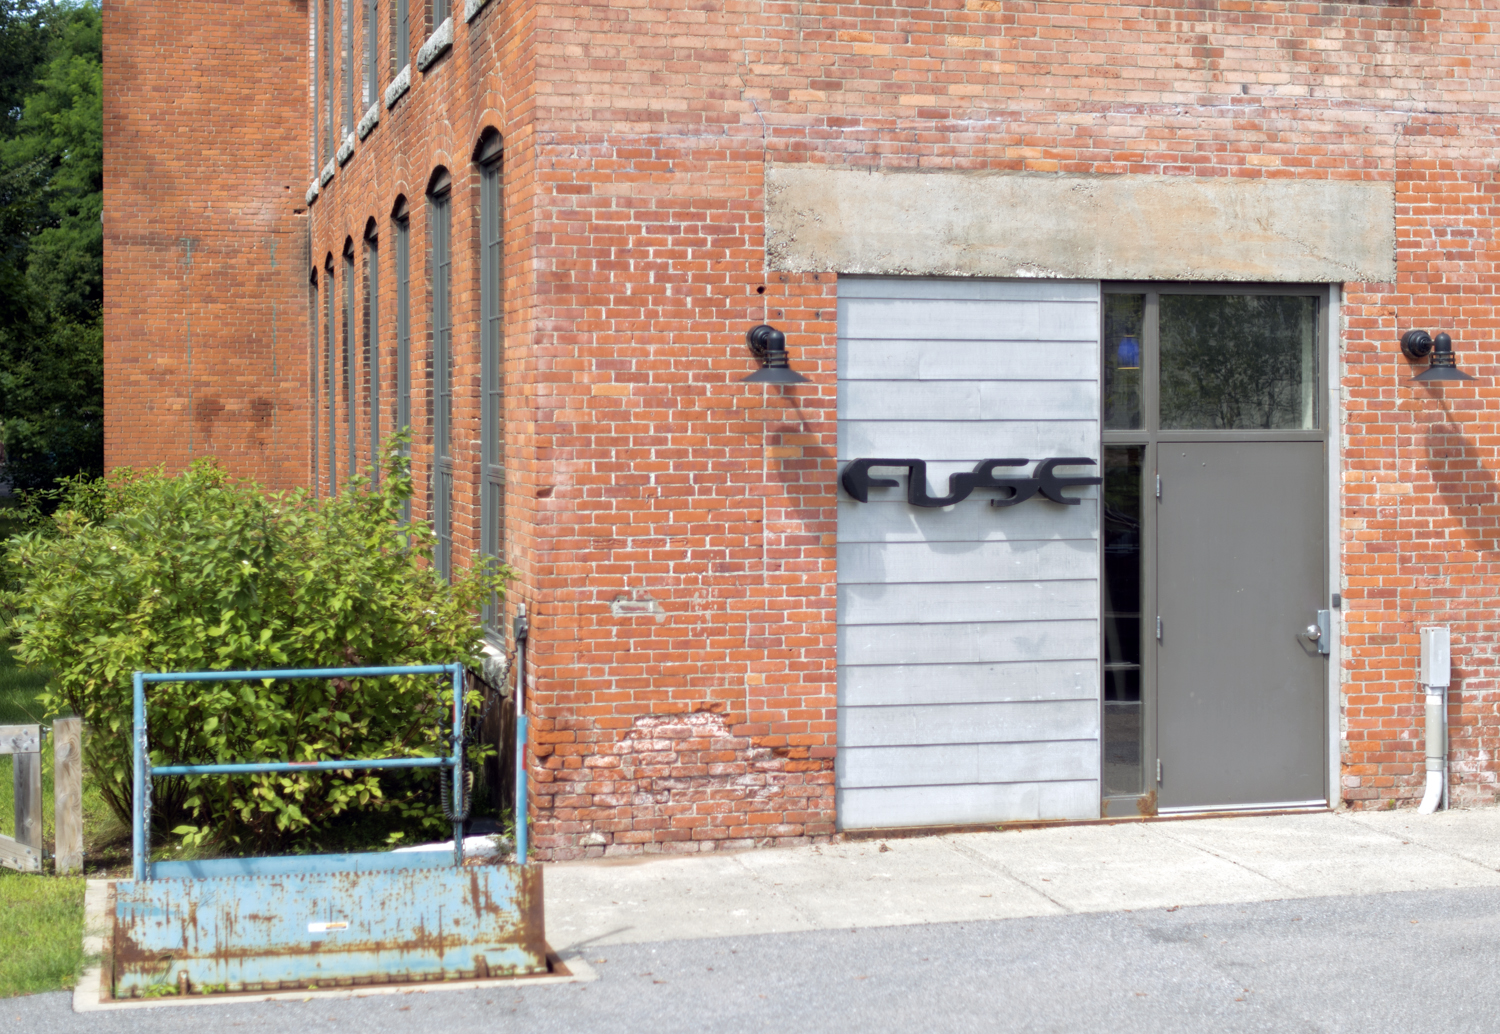 Fuse 110 W Canal St #101, Winooski Vermont 05404